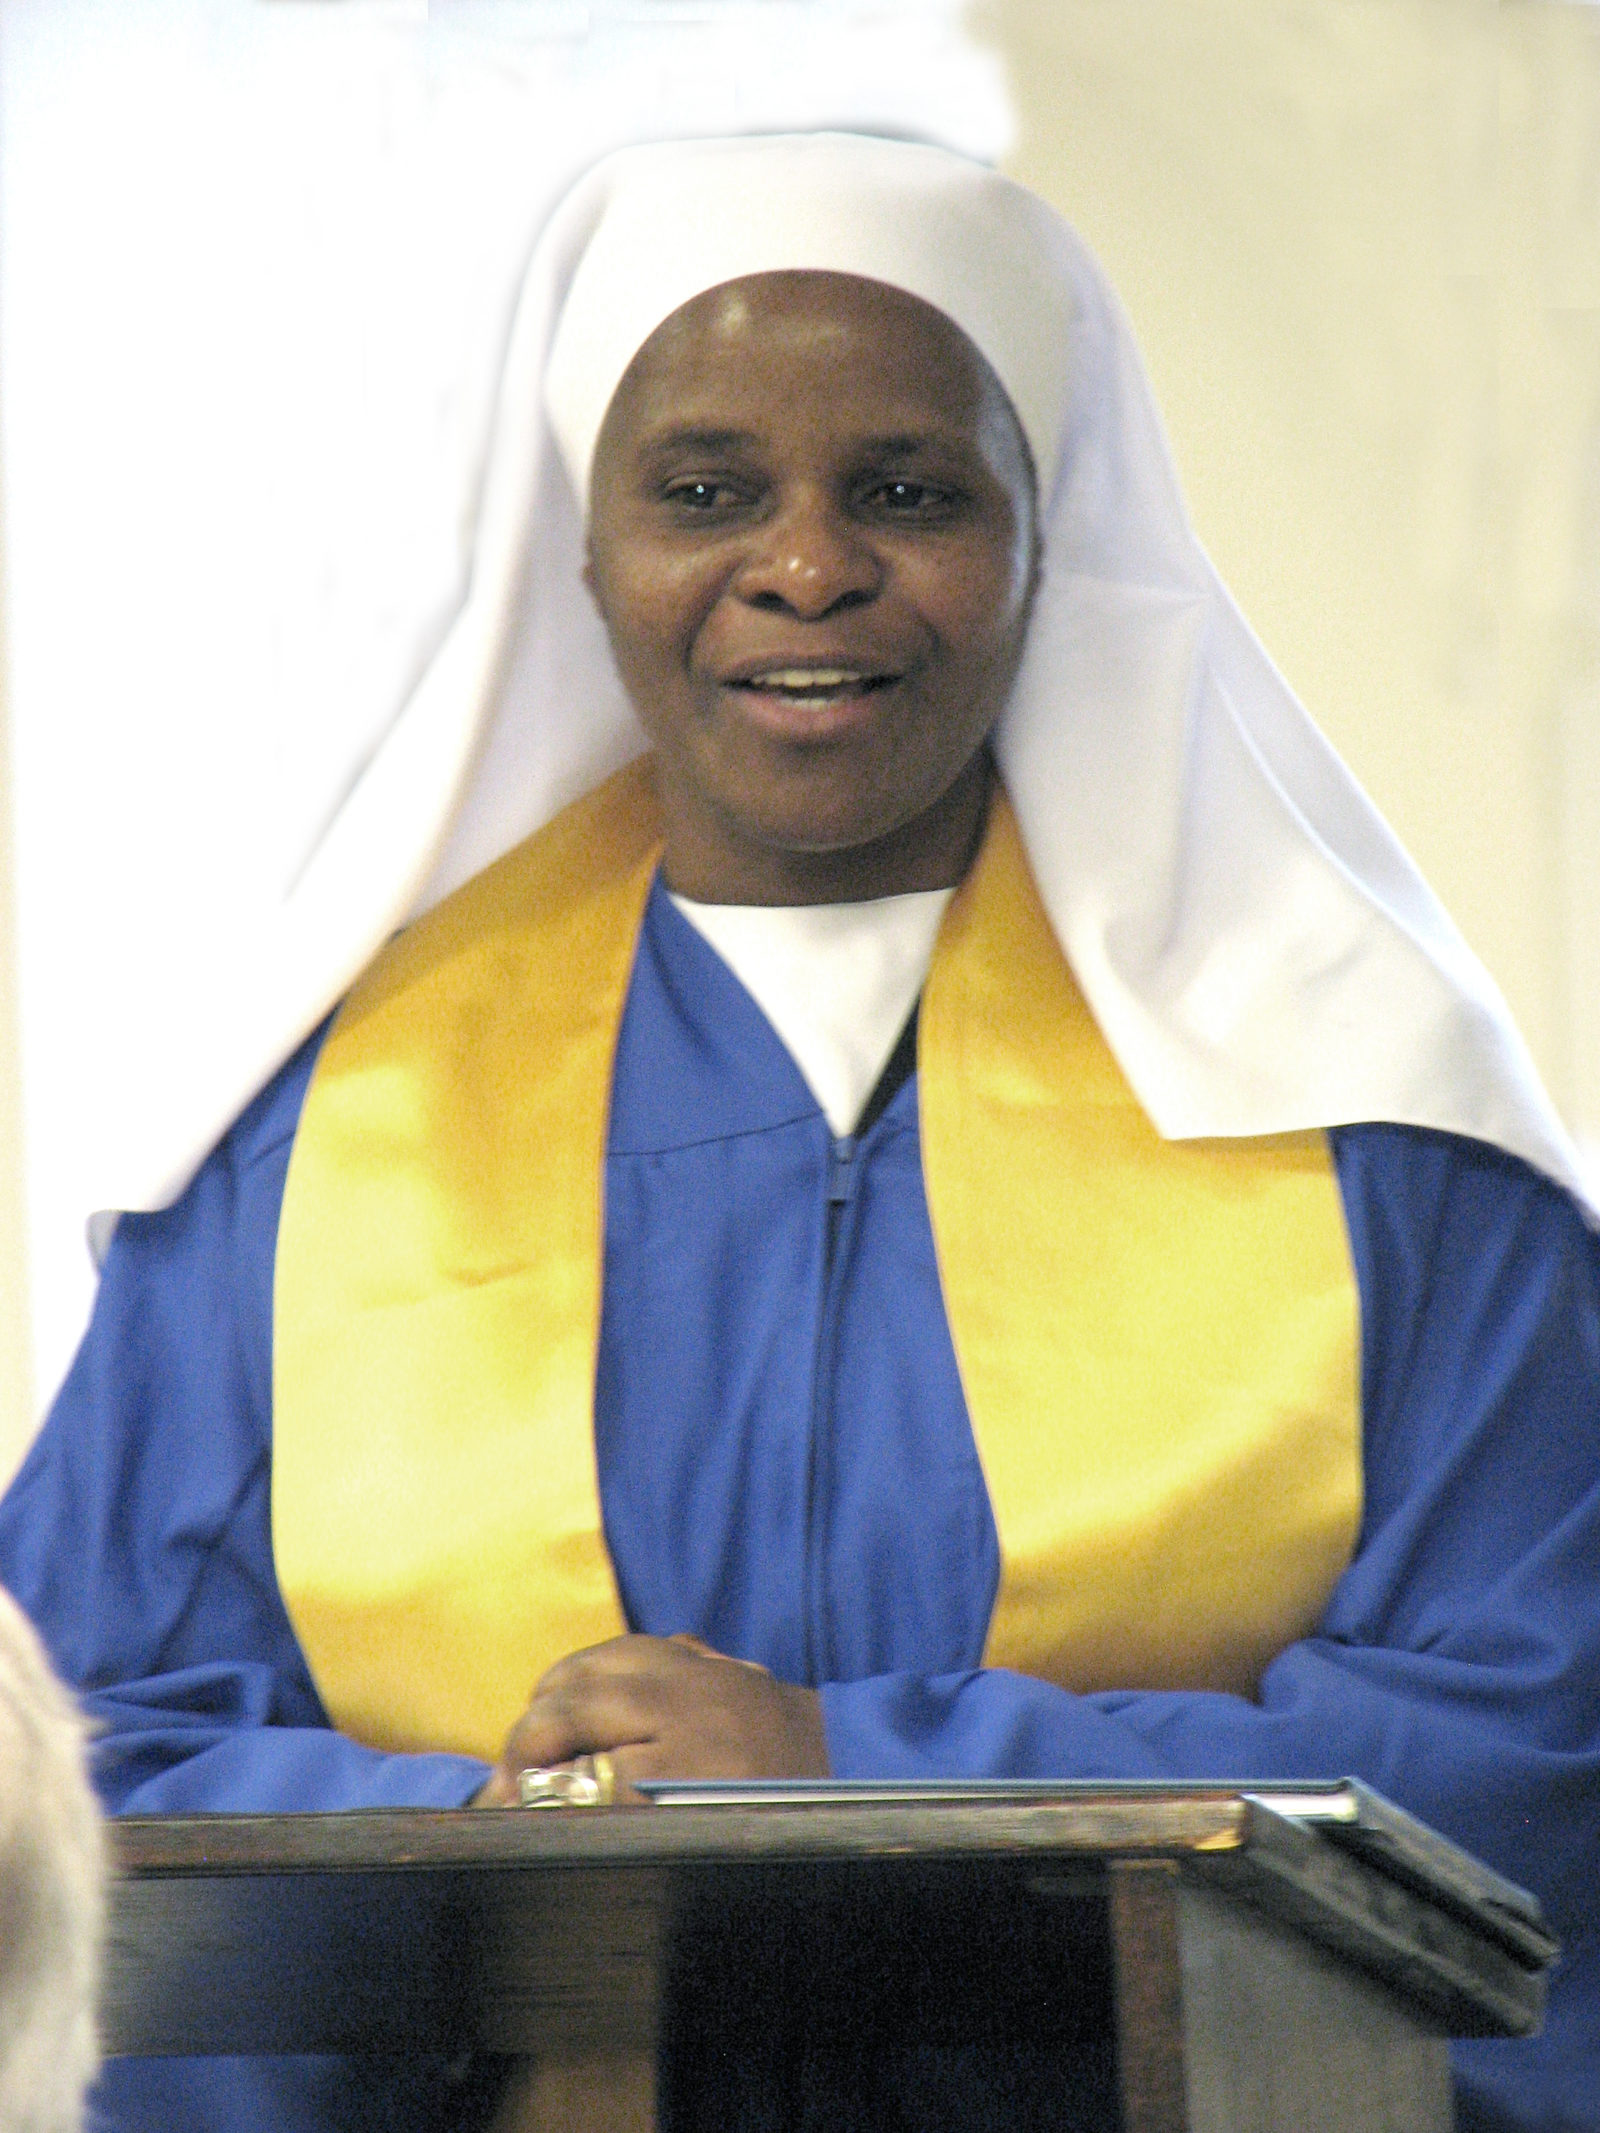 After Sister Gaudensia Mwanyika graduated from college, she returned home to Tanzania and built a school for children north of Dar es Salaam.